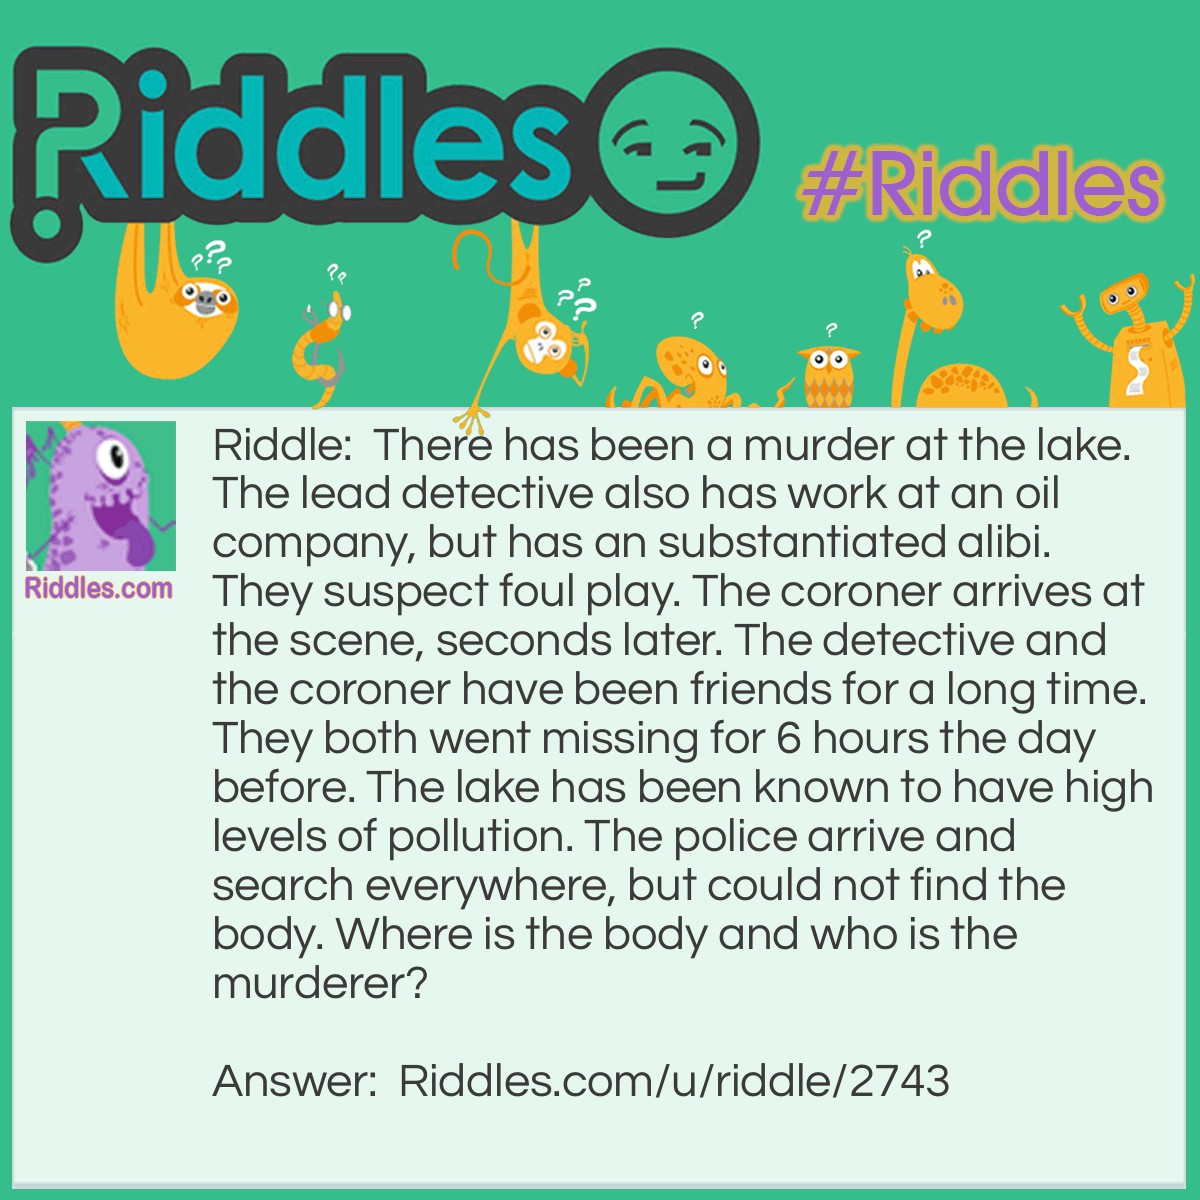 Riddle: There has been a murder at the lake. The lead detective also has work at an oil company, but has an substantiated alibi. They suspect foul play. The coroner arrives at the scene, seconds later. The detective and the coroner have been friends for a long time. They both went missing for 6 hours the day before. The lake has been known to have high levels of pollution. The police arrive and search everywhere, but could not find the body. Where is the body and who is the murderer? Answer: No person was murdered that day, the lake itself died because of the pollution. The murderer is the coroner since he does not have an alibi. The detective asked the coroner to do this in the name of their friendship. He agreed and polluted the lake. This was during the missing hours.